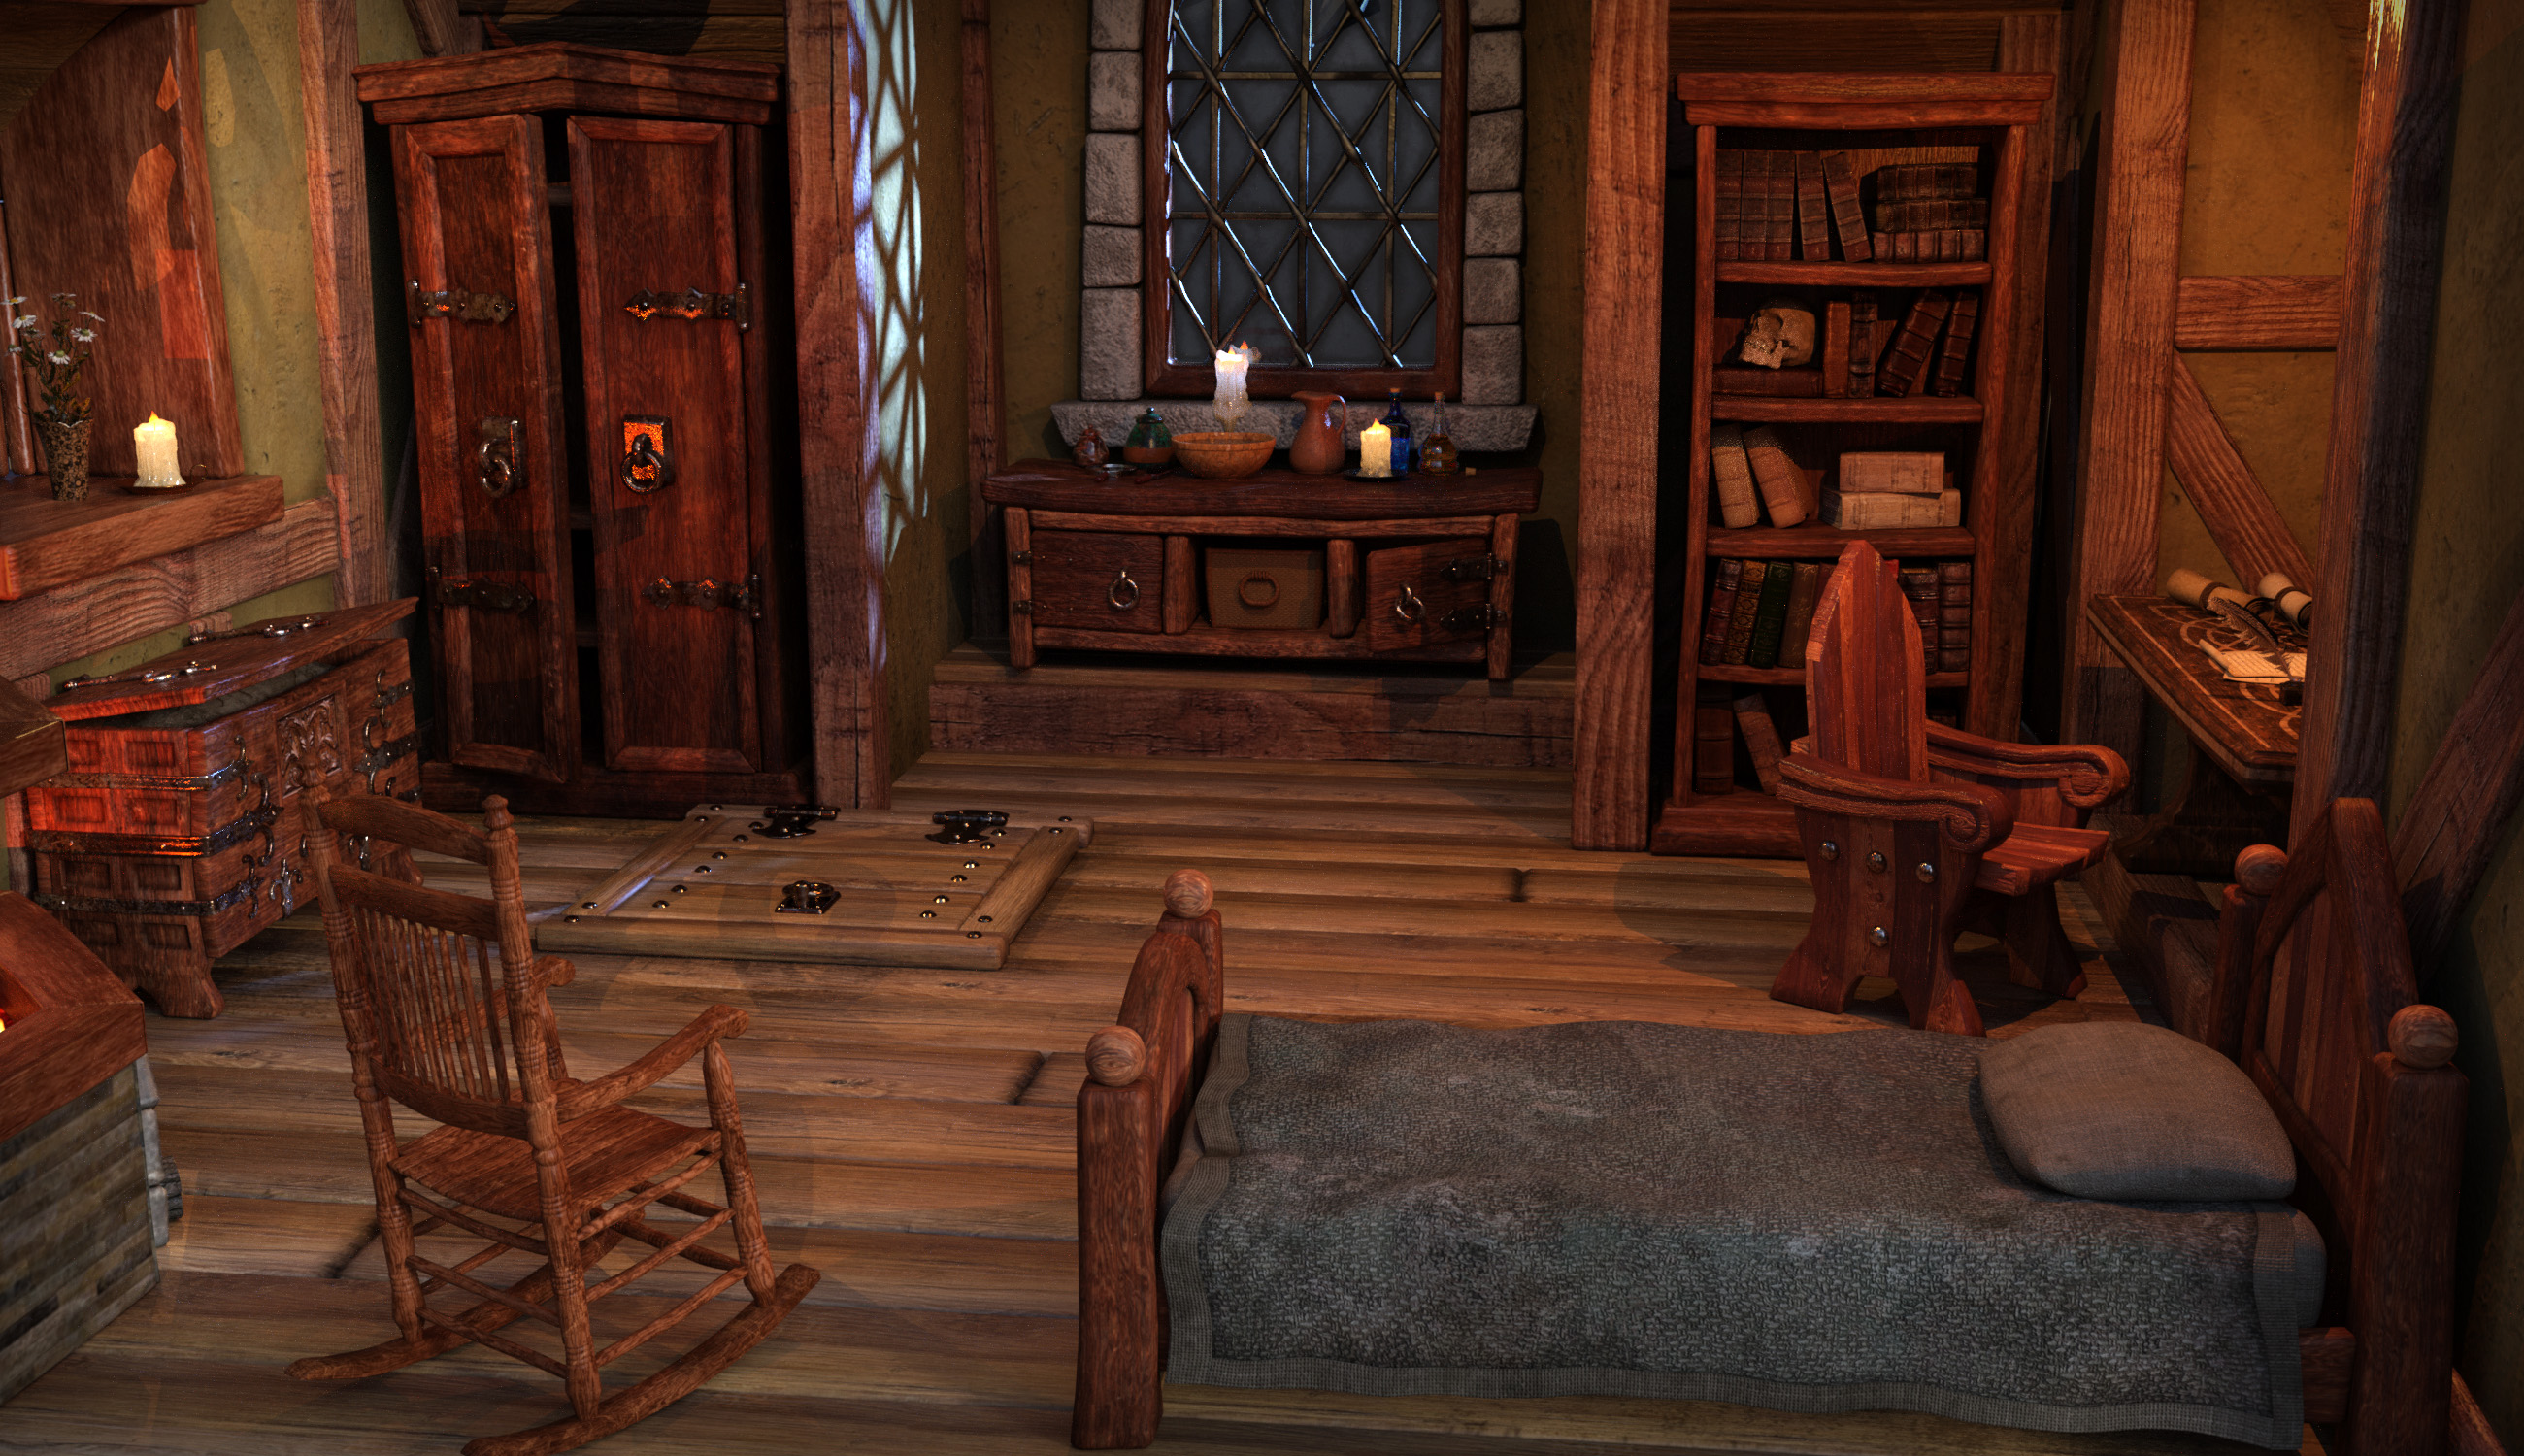 Fairytale Furniture by: The Alchemist, 3D Models by Daz 3D